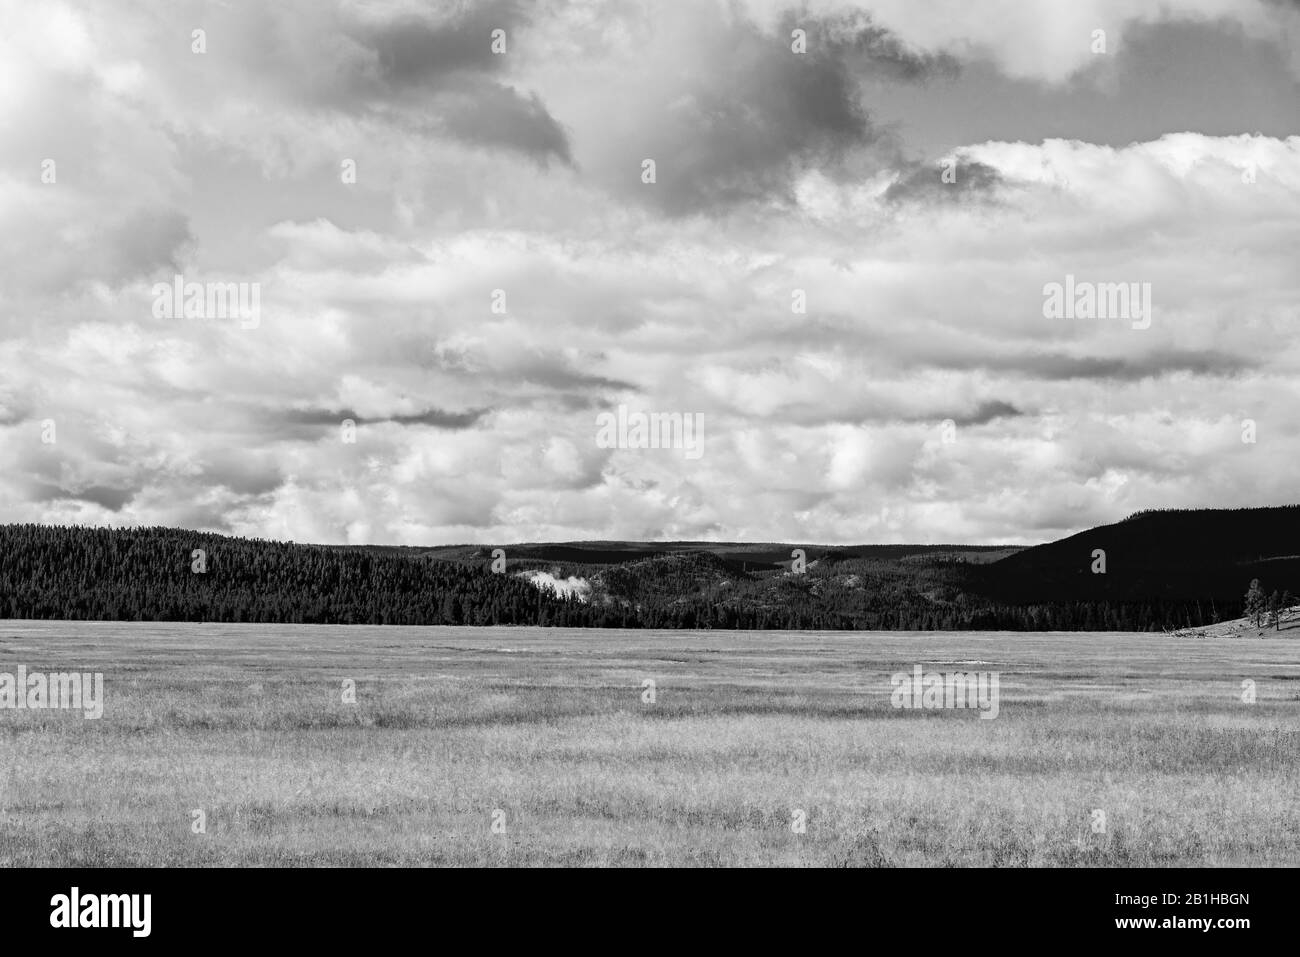 Black and white, fields of grain with hills and mountains beyond. White fluffy clouds in the sky. Stock Photo